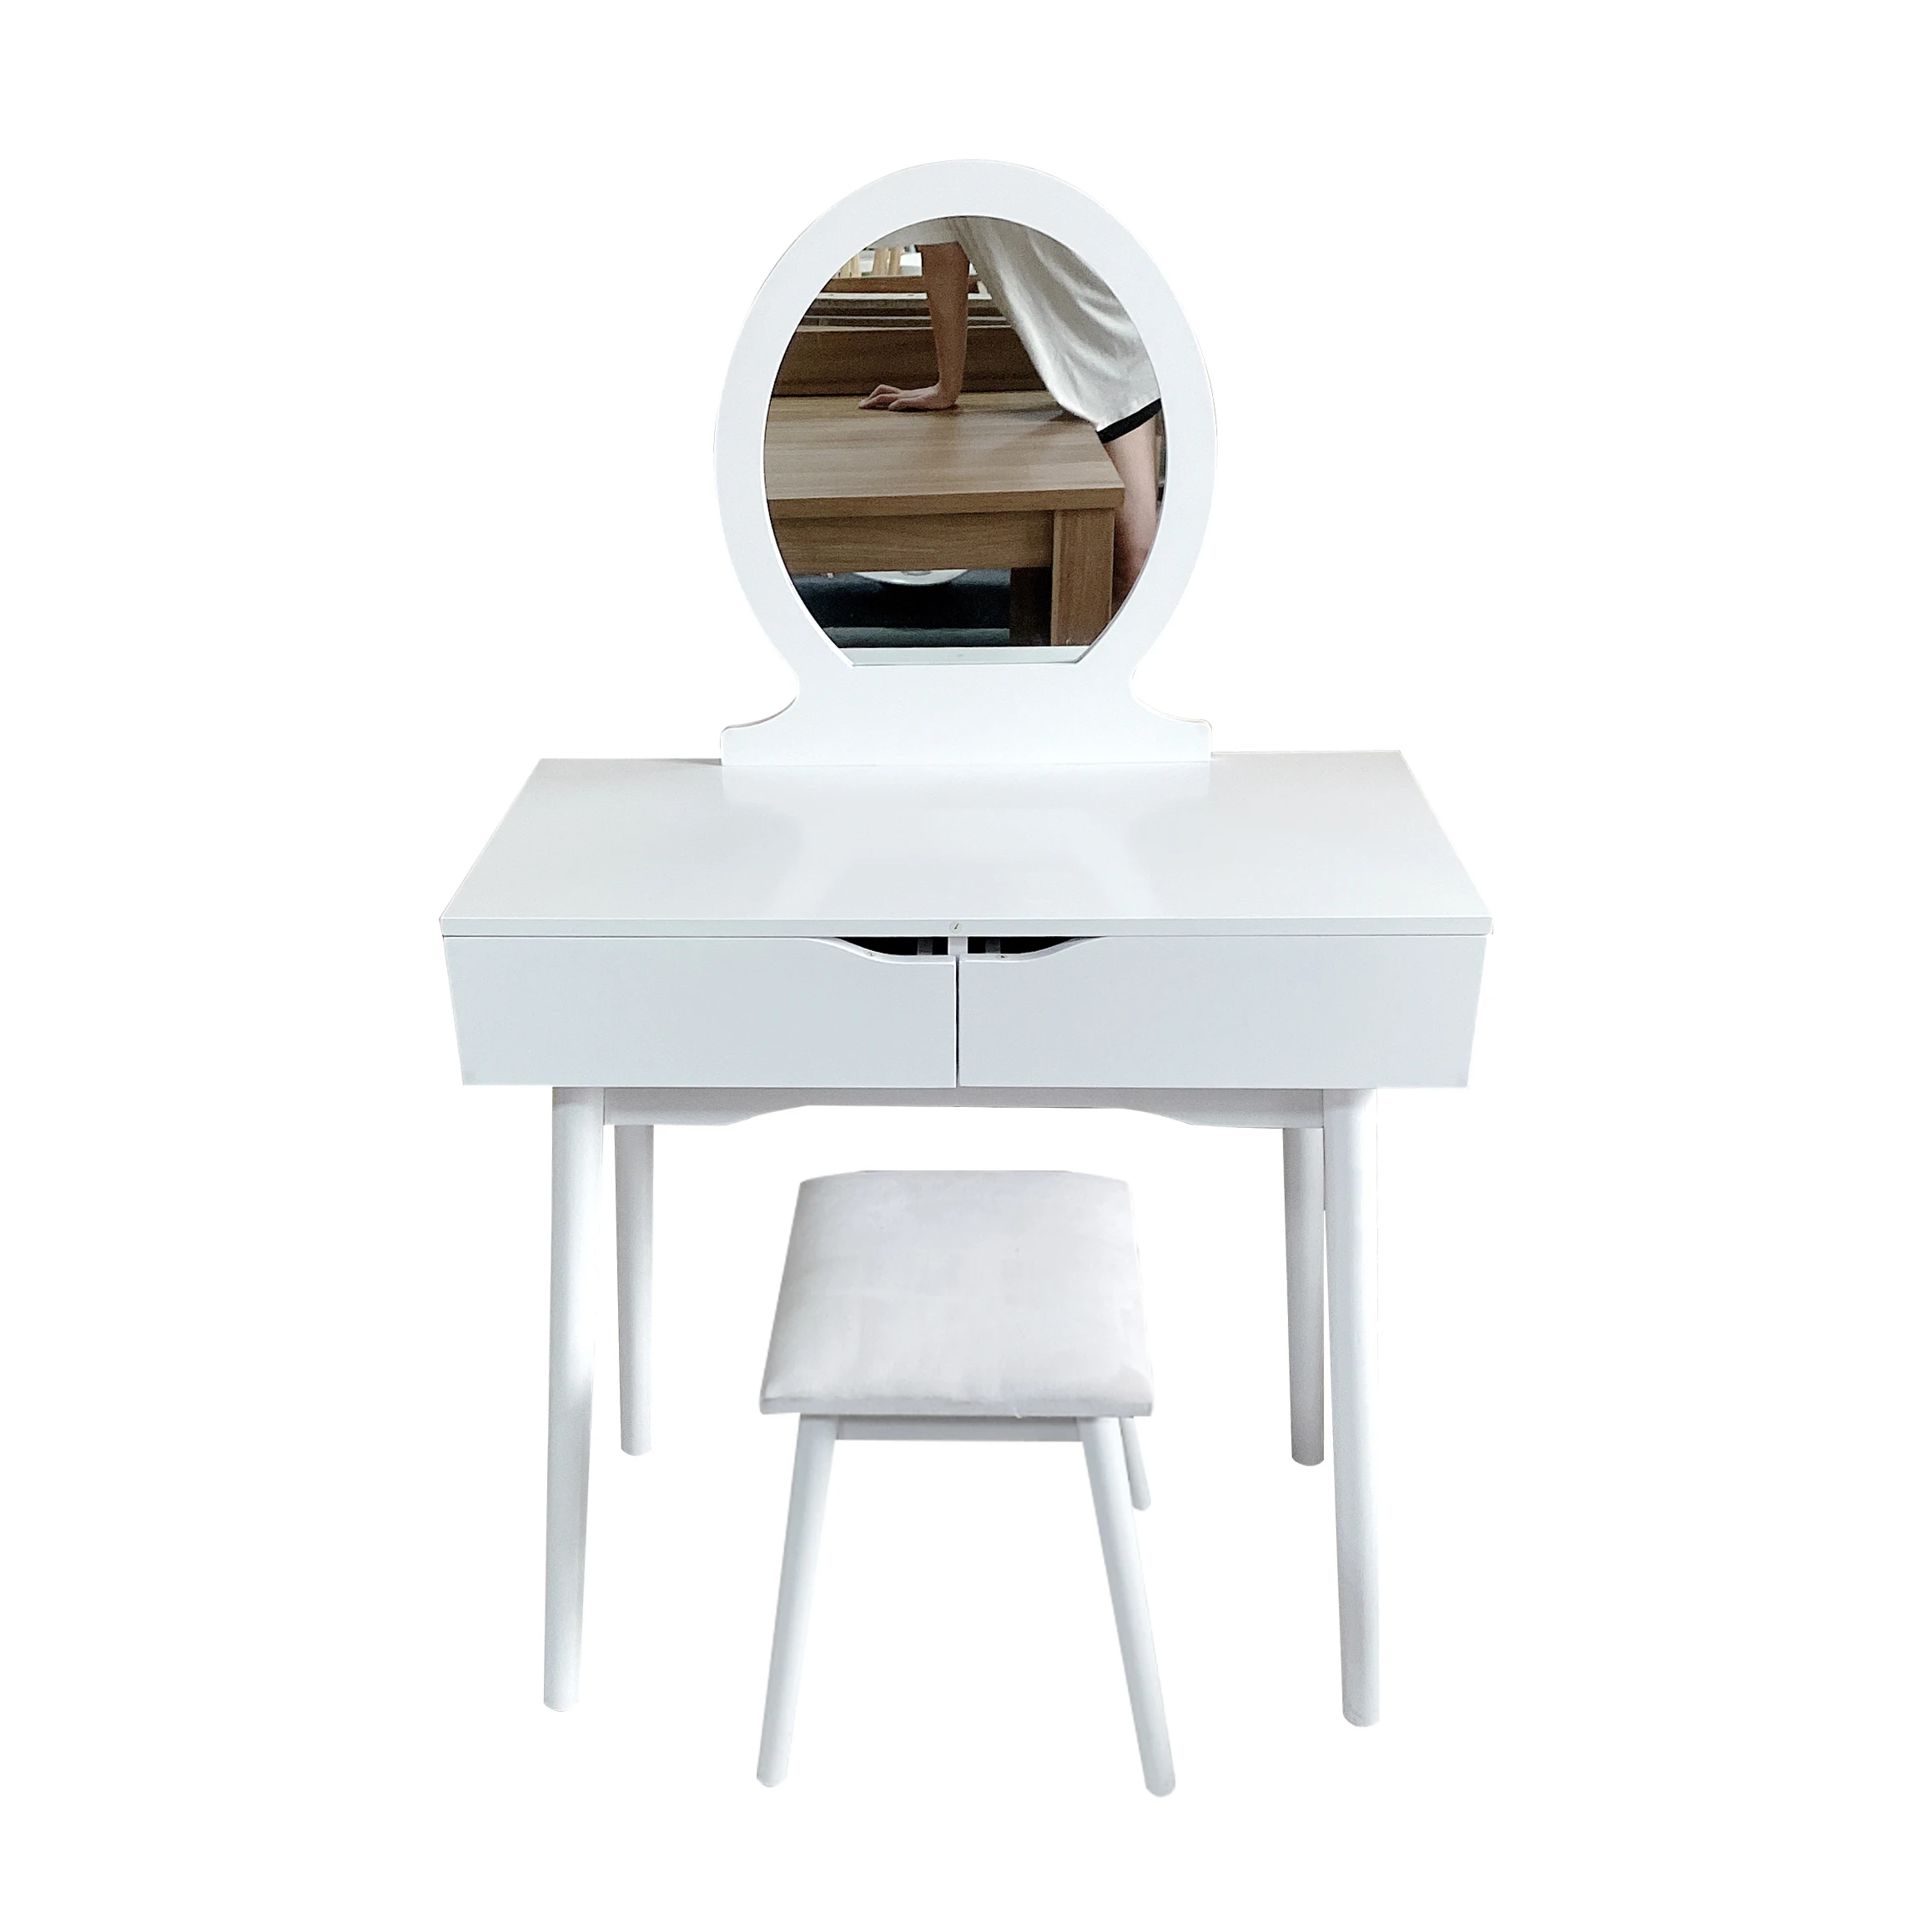 Hot Sale French White Modern Vanity Table Set Bedroom Makeup Vanity Dressing Table And Stool Buy Dressing Tables